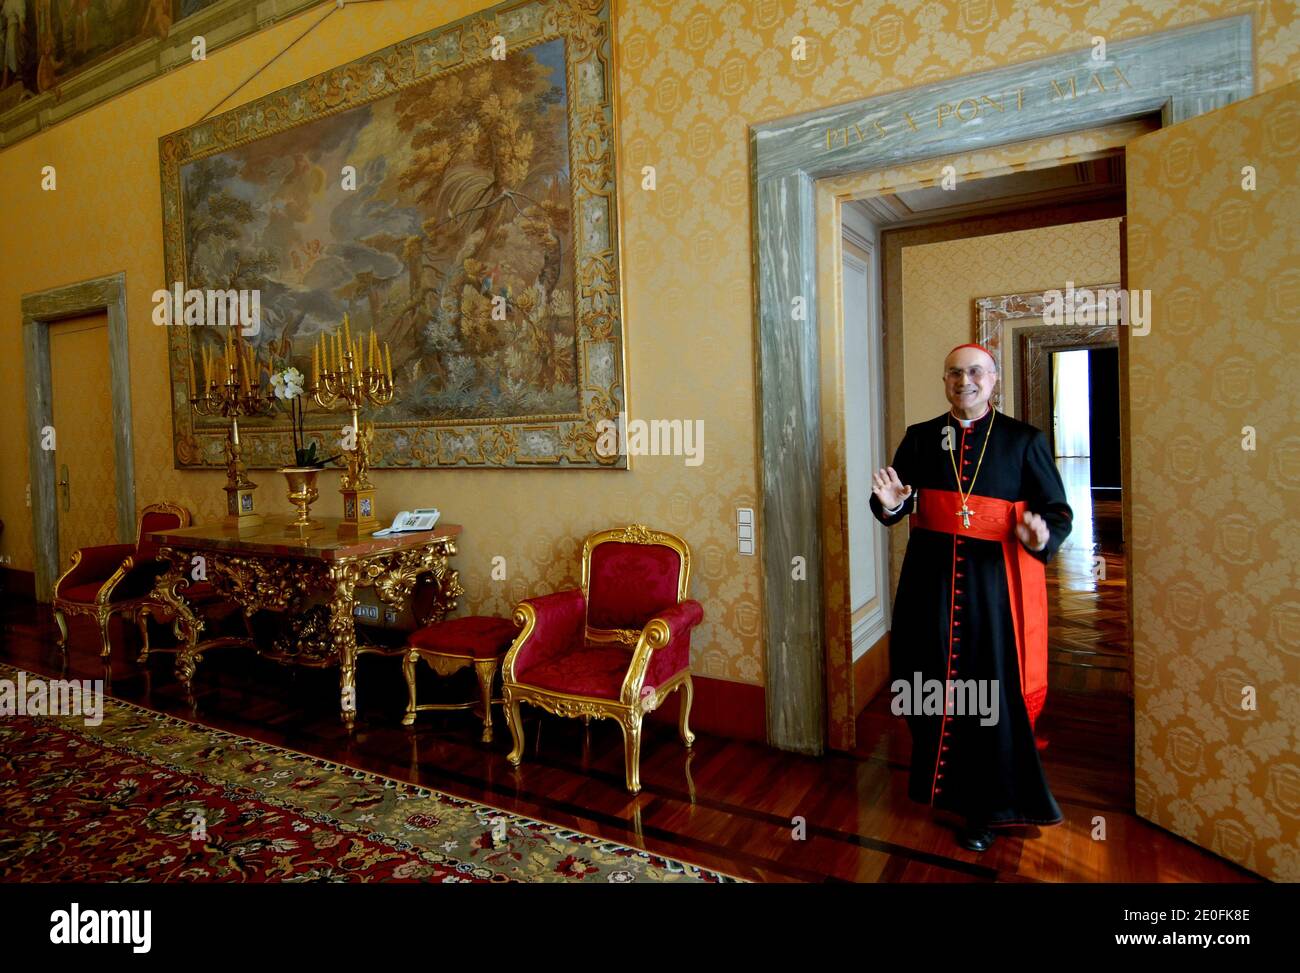 Cardinal Tarcisio Bertone , Vatican Secretary of State at the Vatican on March 17,2007. The Secretary of State is the 2nd-ranking official at the Vatican, with broad authority over the internal and external policies of the Holy See.An atmosphere of scandal shrouds the Apostolic Palace at the Vatican on May 2012. The pope's butler has been arrested in its embarrassing leaks scandal, adding a Hollywood twist to a sordid tale of power struggles, intrigue and corruption in the highest levels of Catholic Church governance. Vatican documents leaked to the press in recent months have undermined that Stock Photo